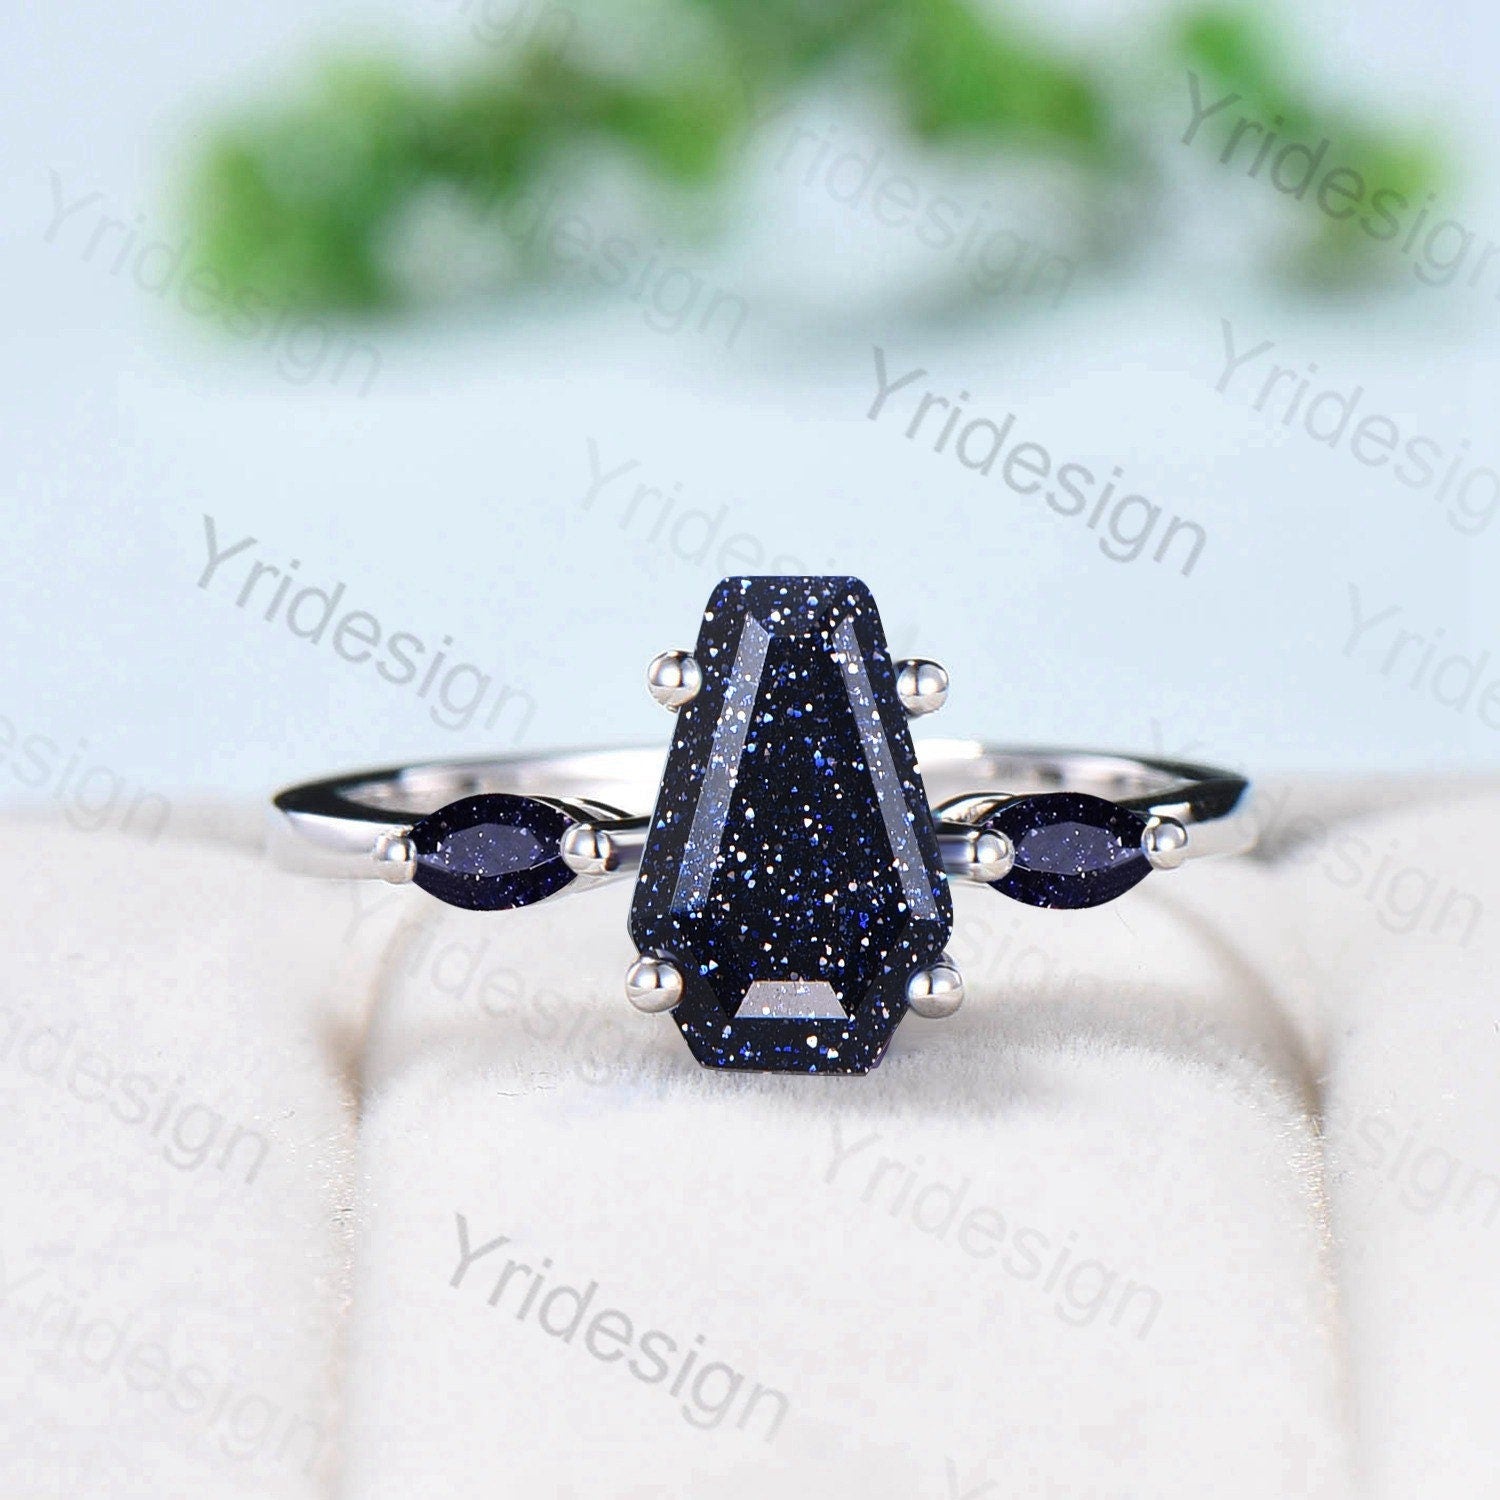 Minimalist Coffin Shaped Blue Sandstone Ring Dainty Marquise Galaxy Star Shield Three Stone Goldstone Wedding Ring Proposal Gifts for Women - PENFINE